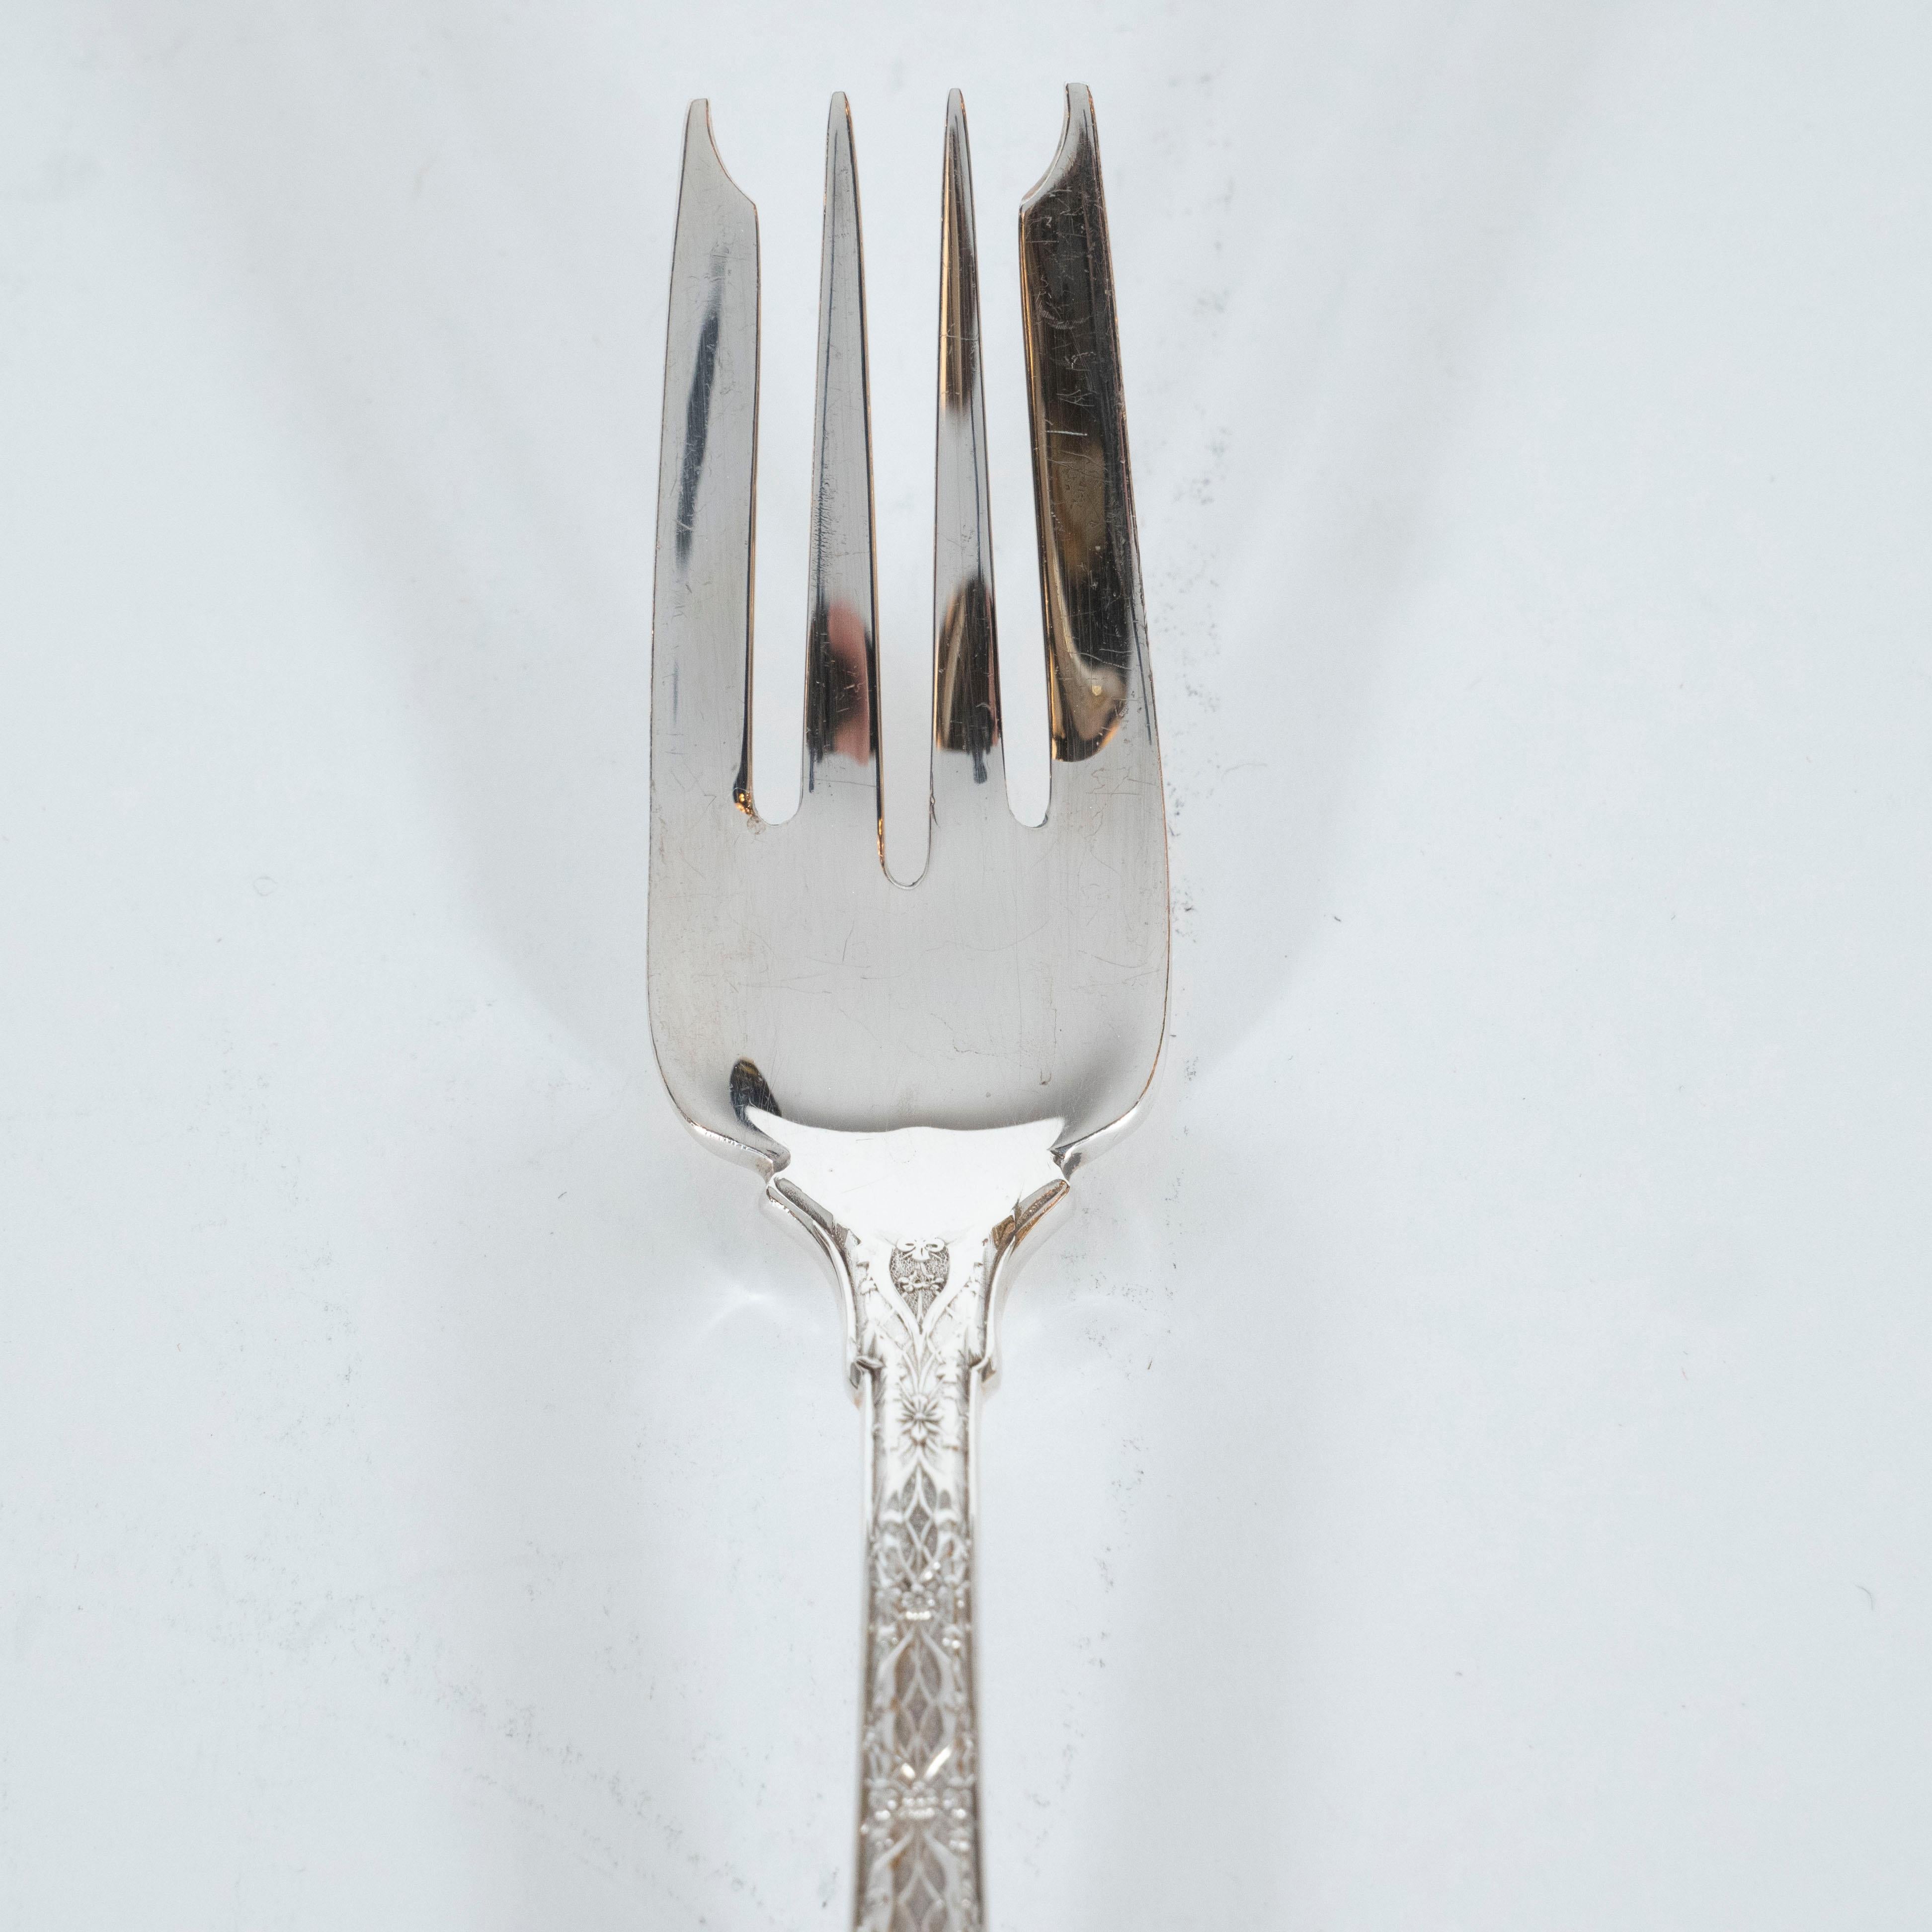 This elegant set of four Mid-Century Modern sterling silver forks were realized by Tiffany & Co.- one of America's premiere luxury makers of the finest silver and precious objects since 1837. Part of their 